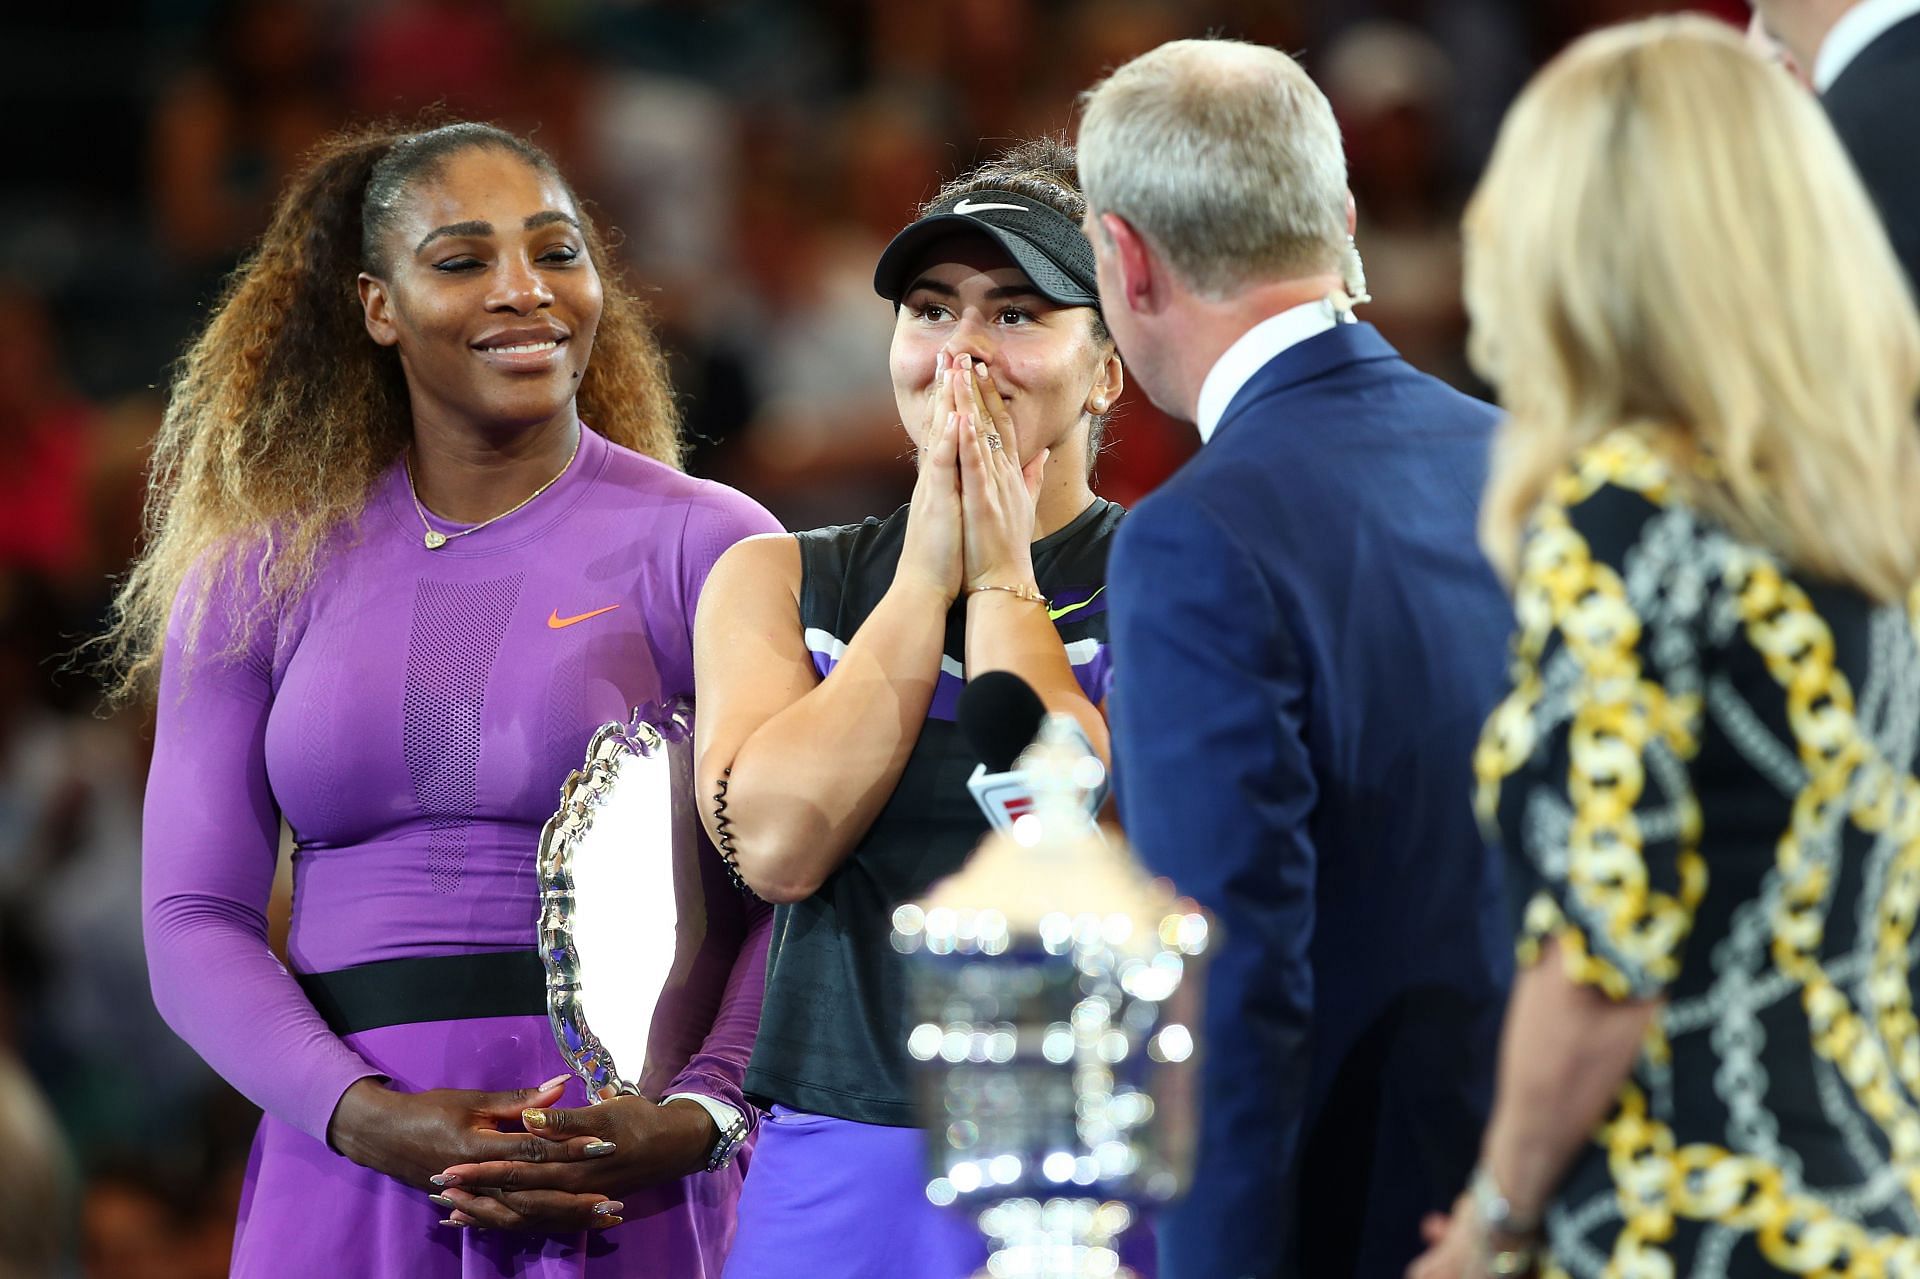 Bianca Andreescu beat Serena Williams to capture her first Grand Slam title at the US Open in 2019